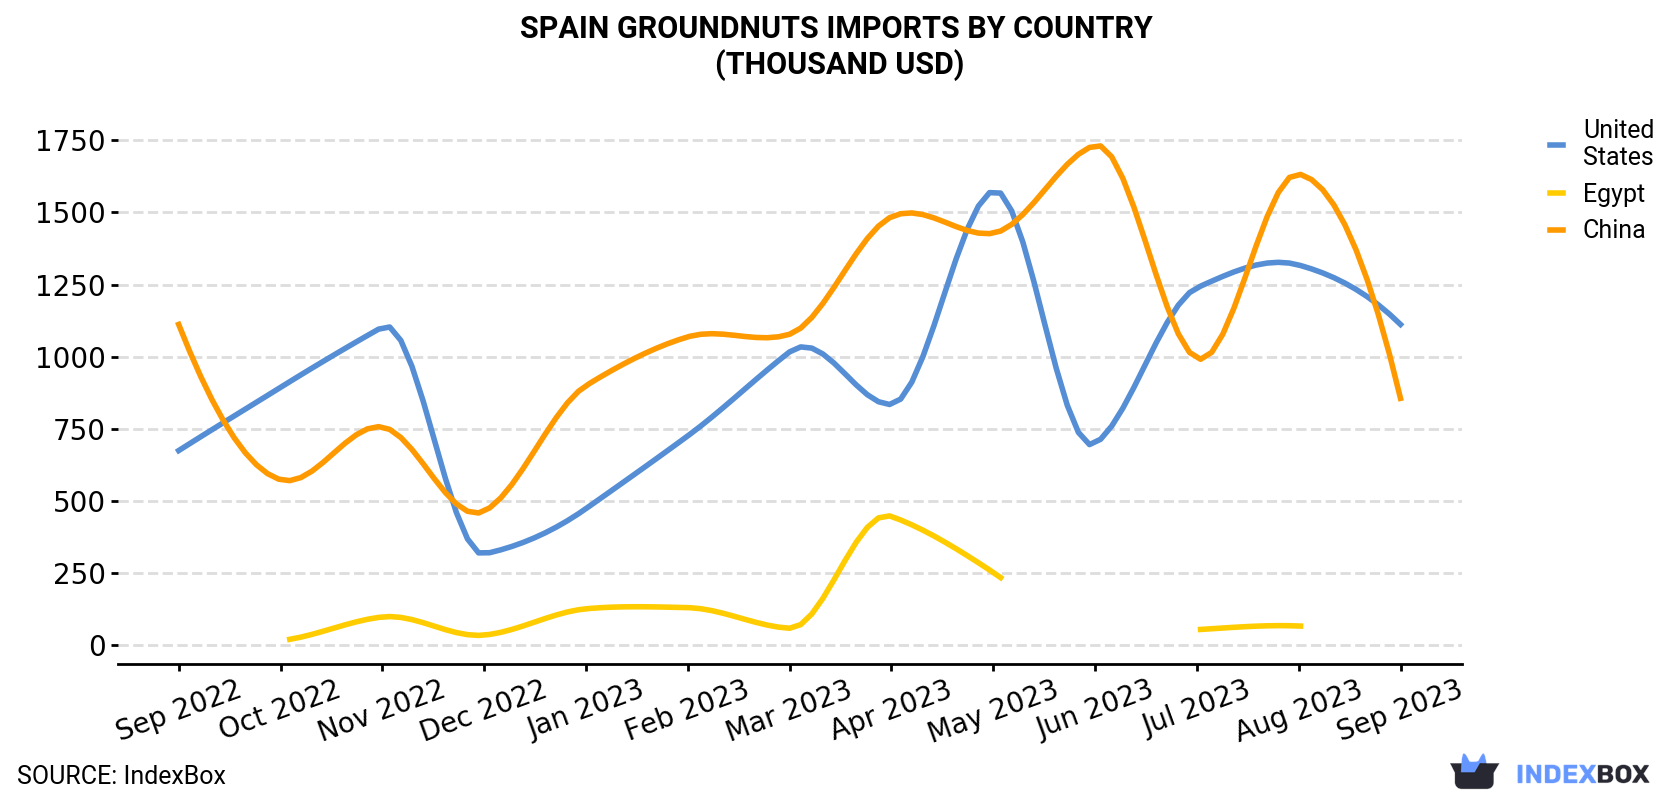 Spain Groundnuts Imports By Country (Thousand USD)